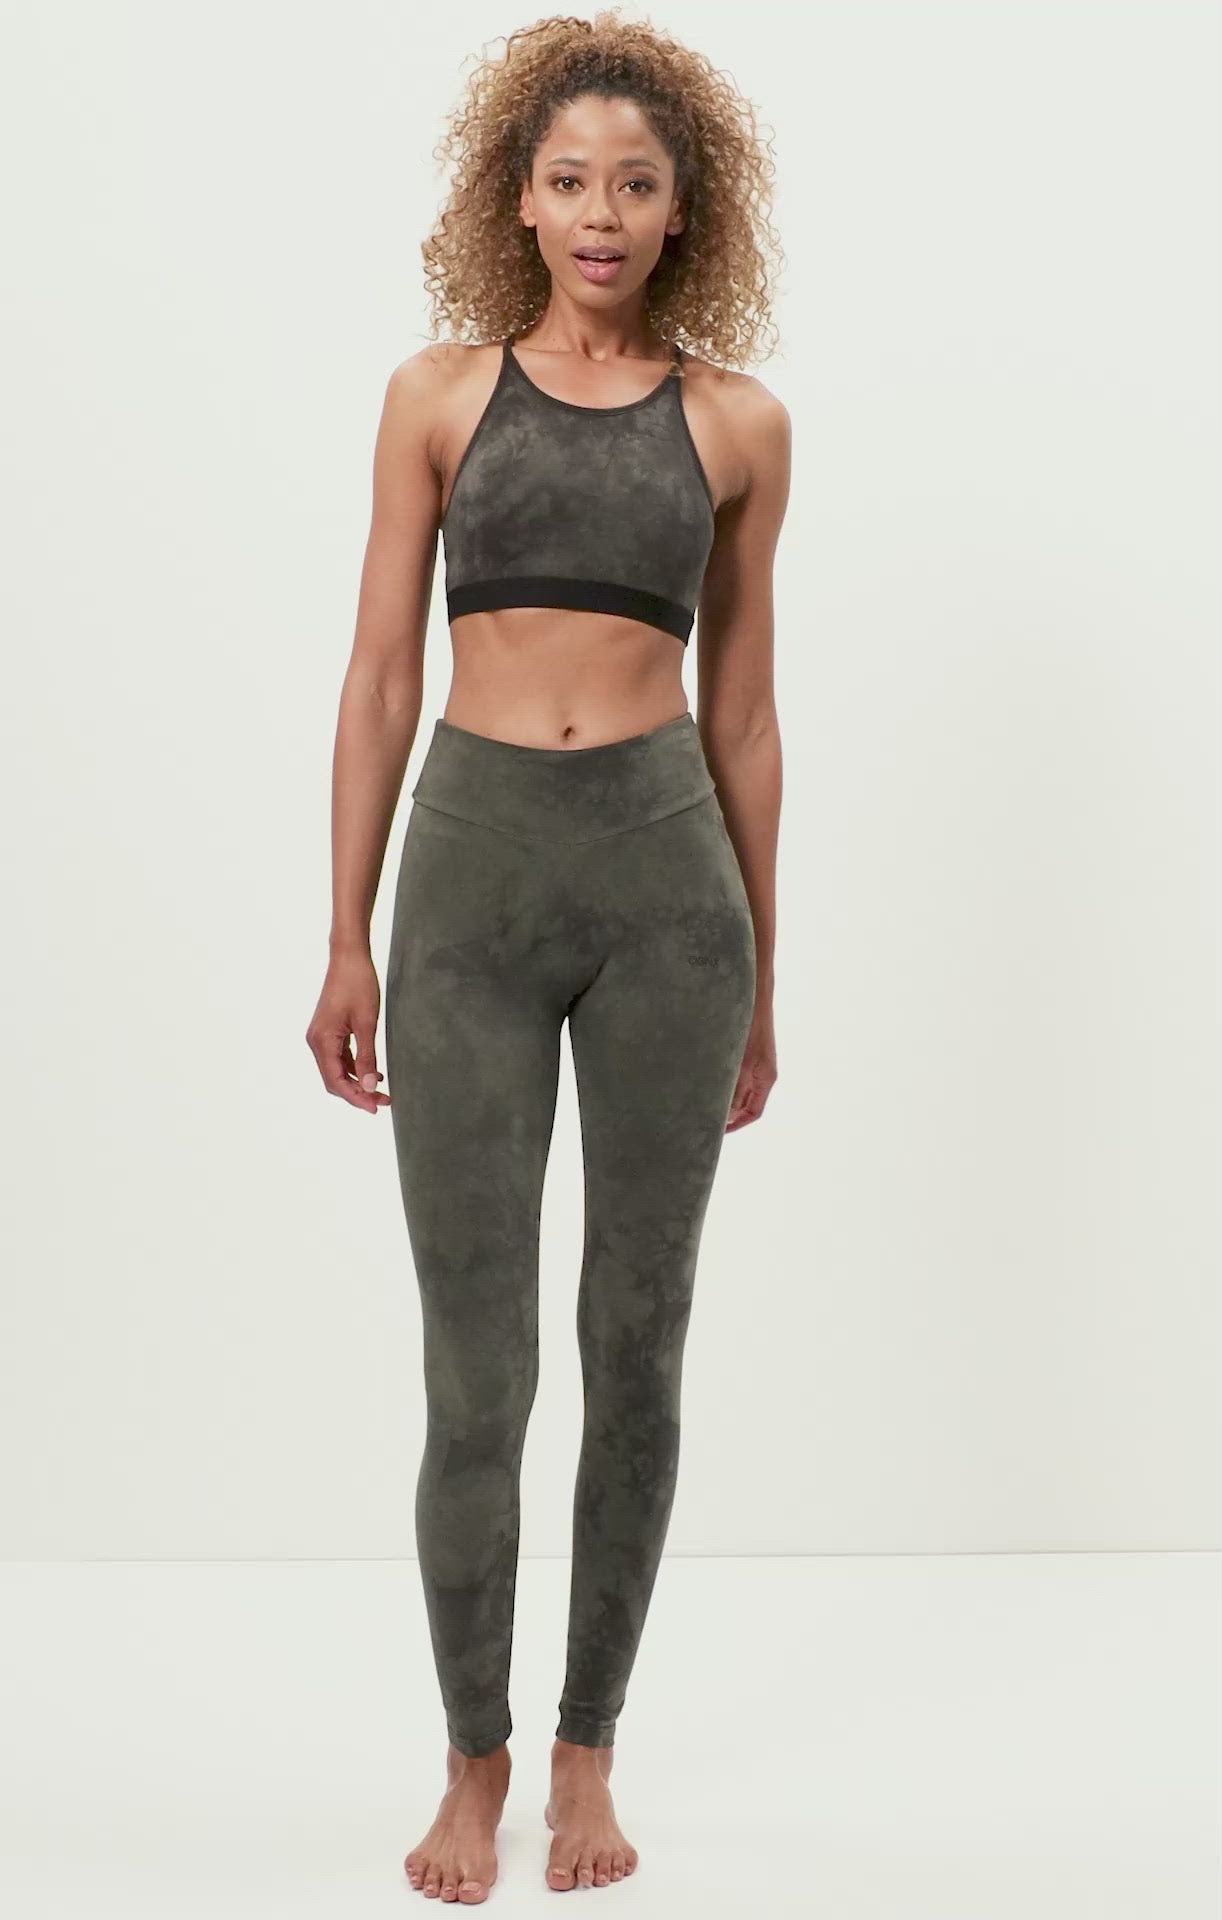 Buy Organic Cotton Seamless Leggings, Fast Delivery